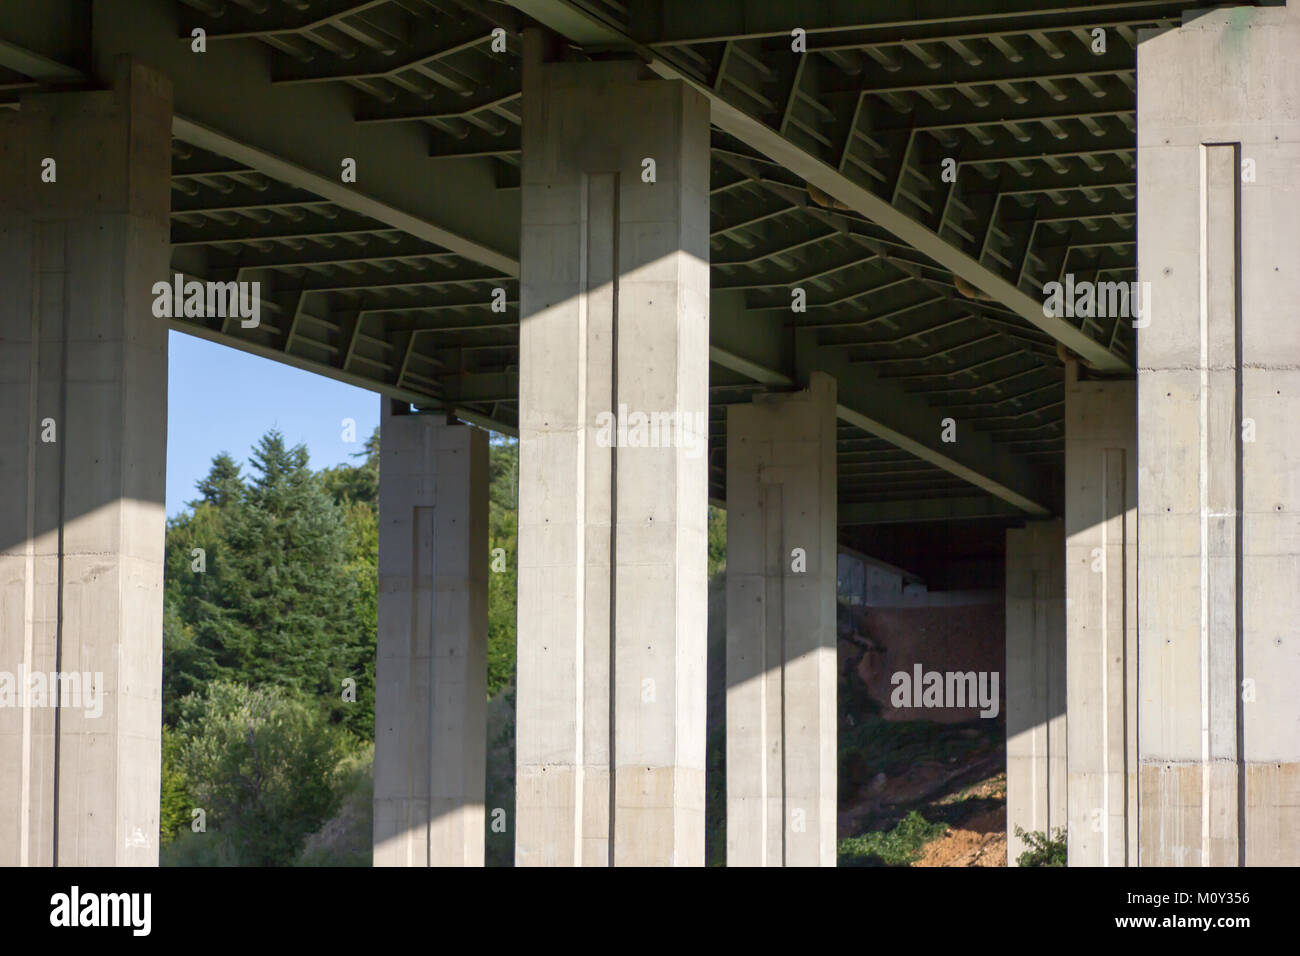 Concrete pillars supporting the A1 viaduct.  Otocac, Croatia 2017 Stock Photo